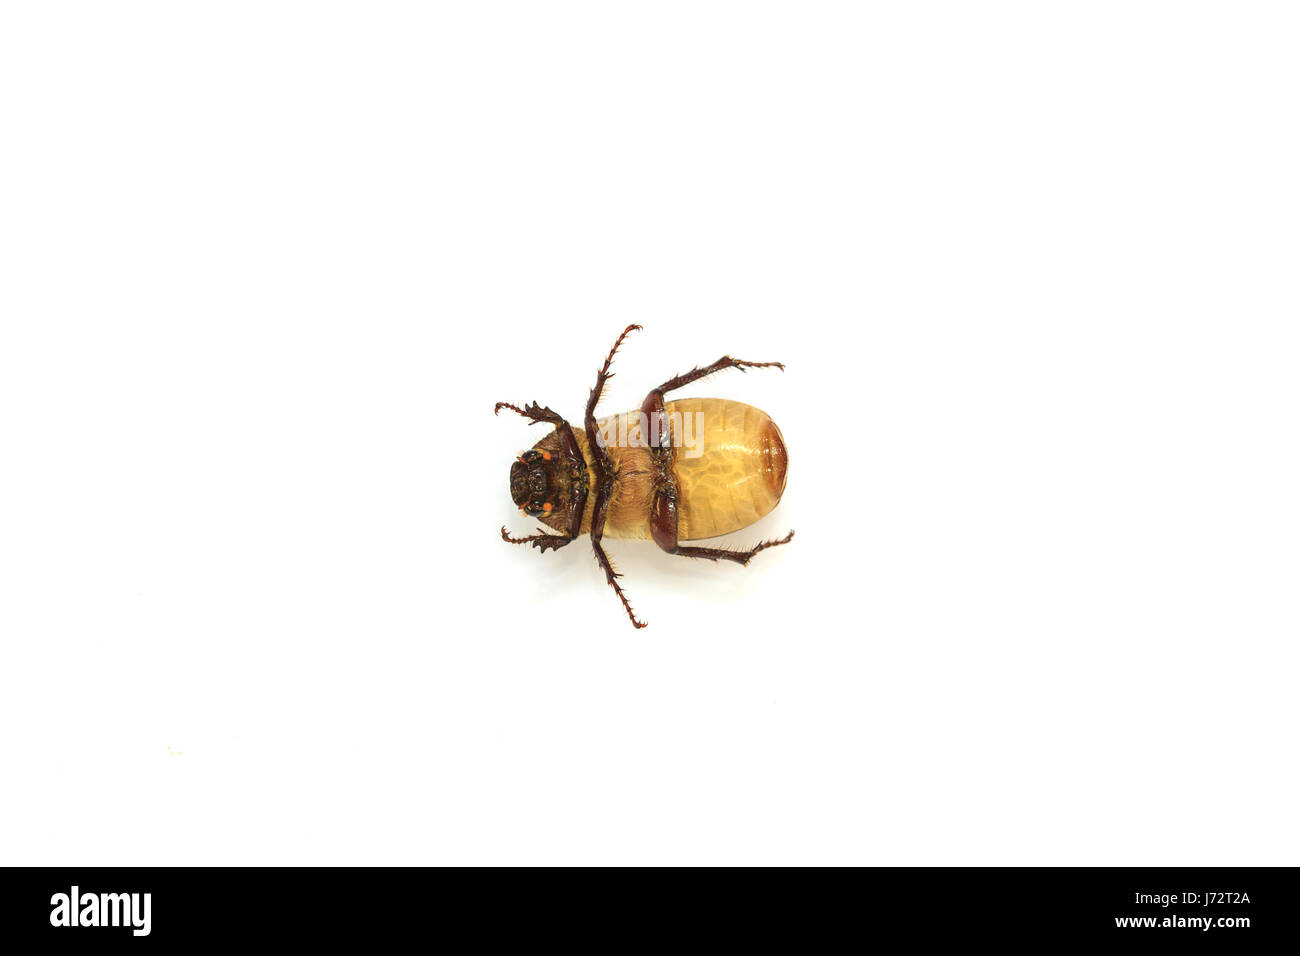 Cockchafer or  May bug on white background Stock Photo